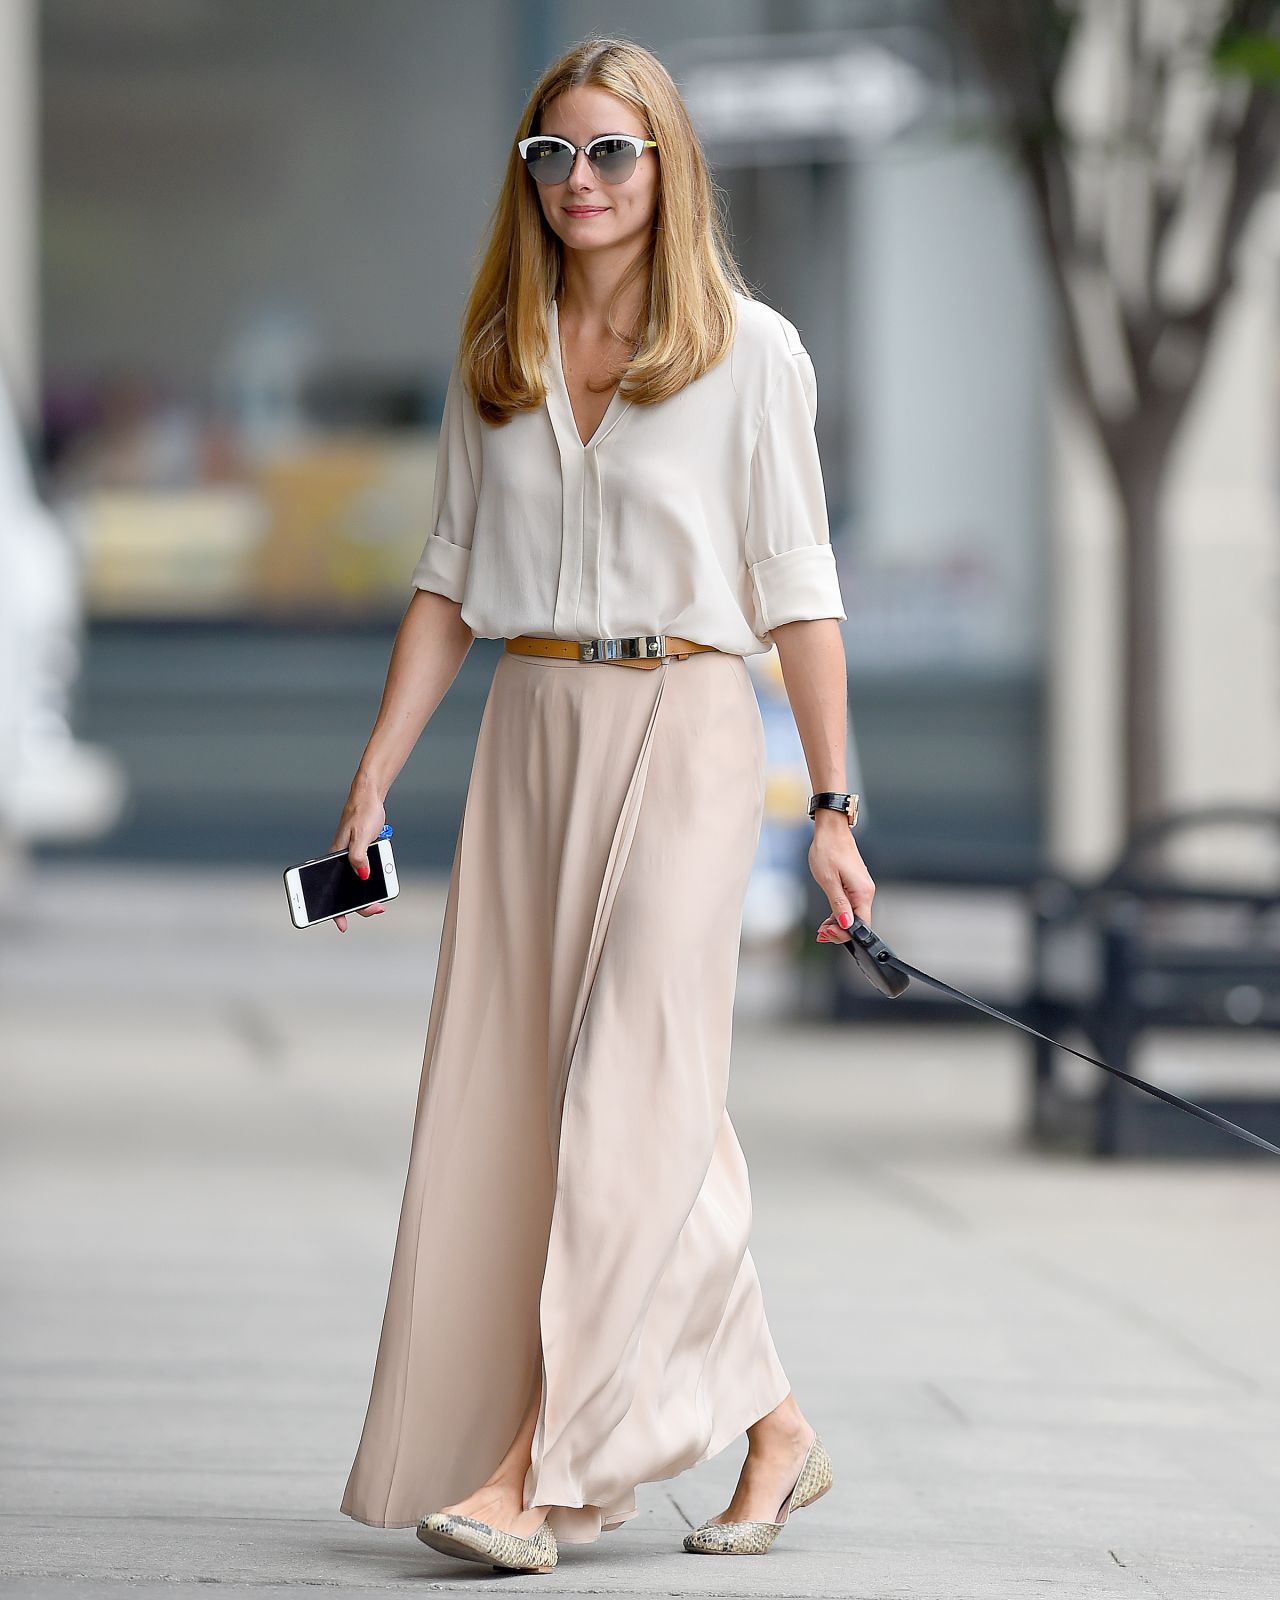 Olivia Palermo Summer Style - Out in New York City, July 2015